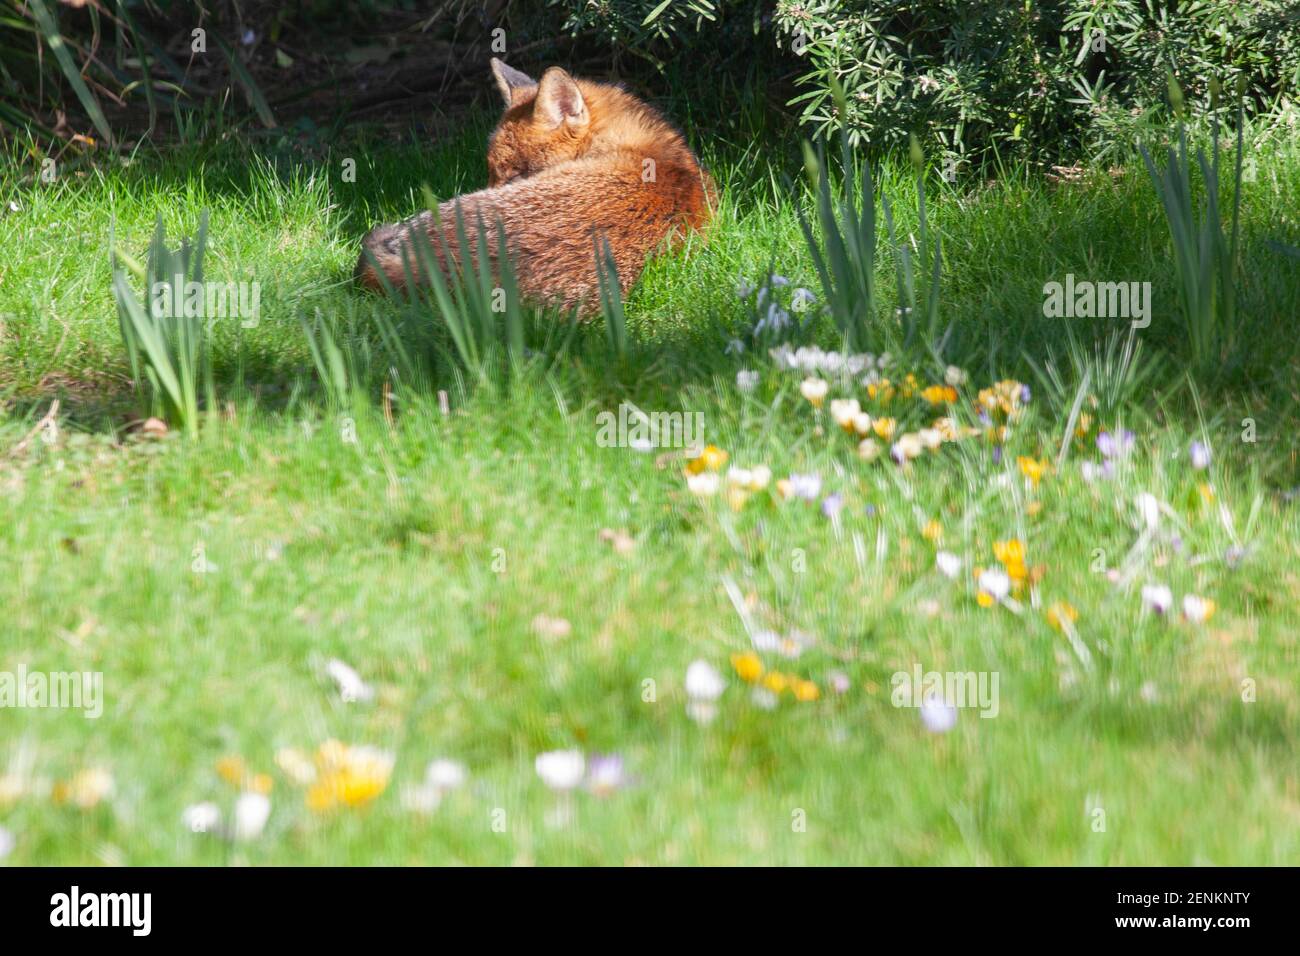 London, UK, 26 February 2021: A sunbathing fox enjoys the mild weather on the lawn of a garden in the London suburb of Clapham. Anna Watson/Alamy Live News Stock Photo